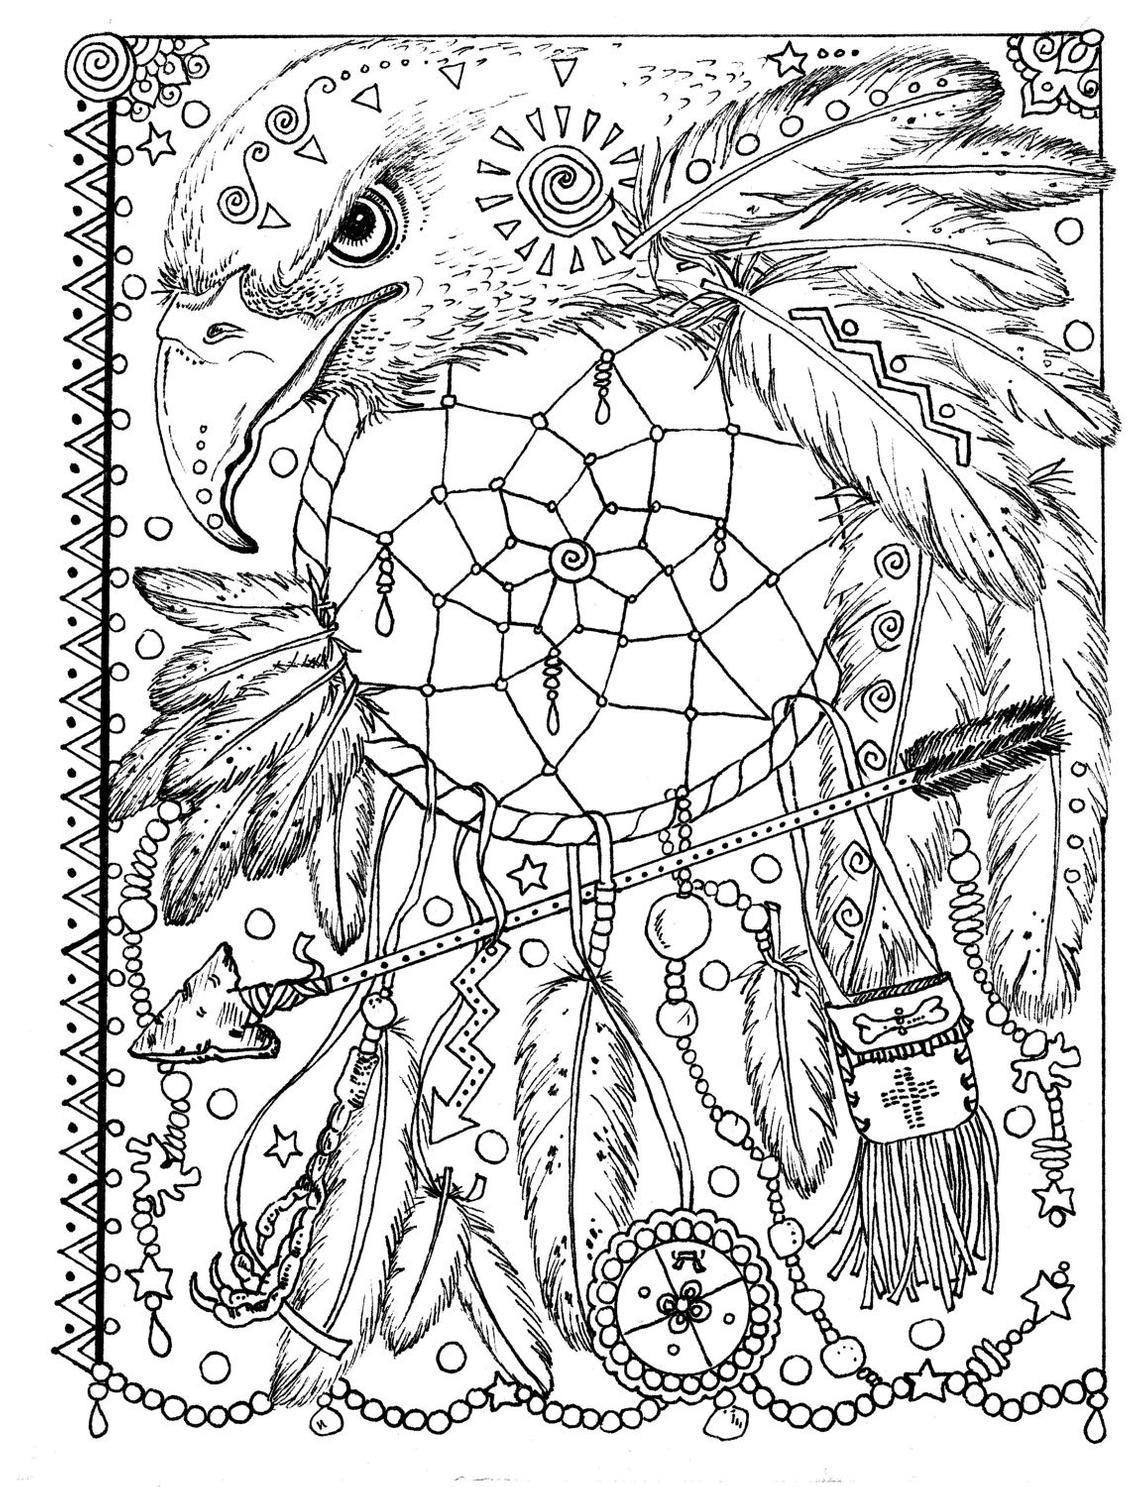 Raven and crow fantasy coloring pages 5 pages instant download animal  spirits to color wolf raven crow | Marybelle.lesoleildefontanieu.com